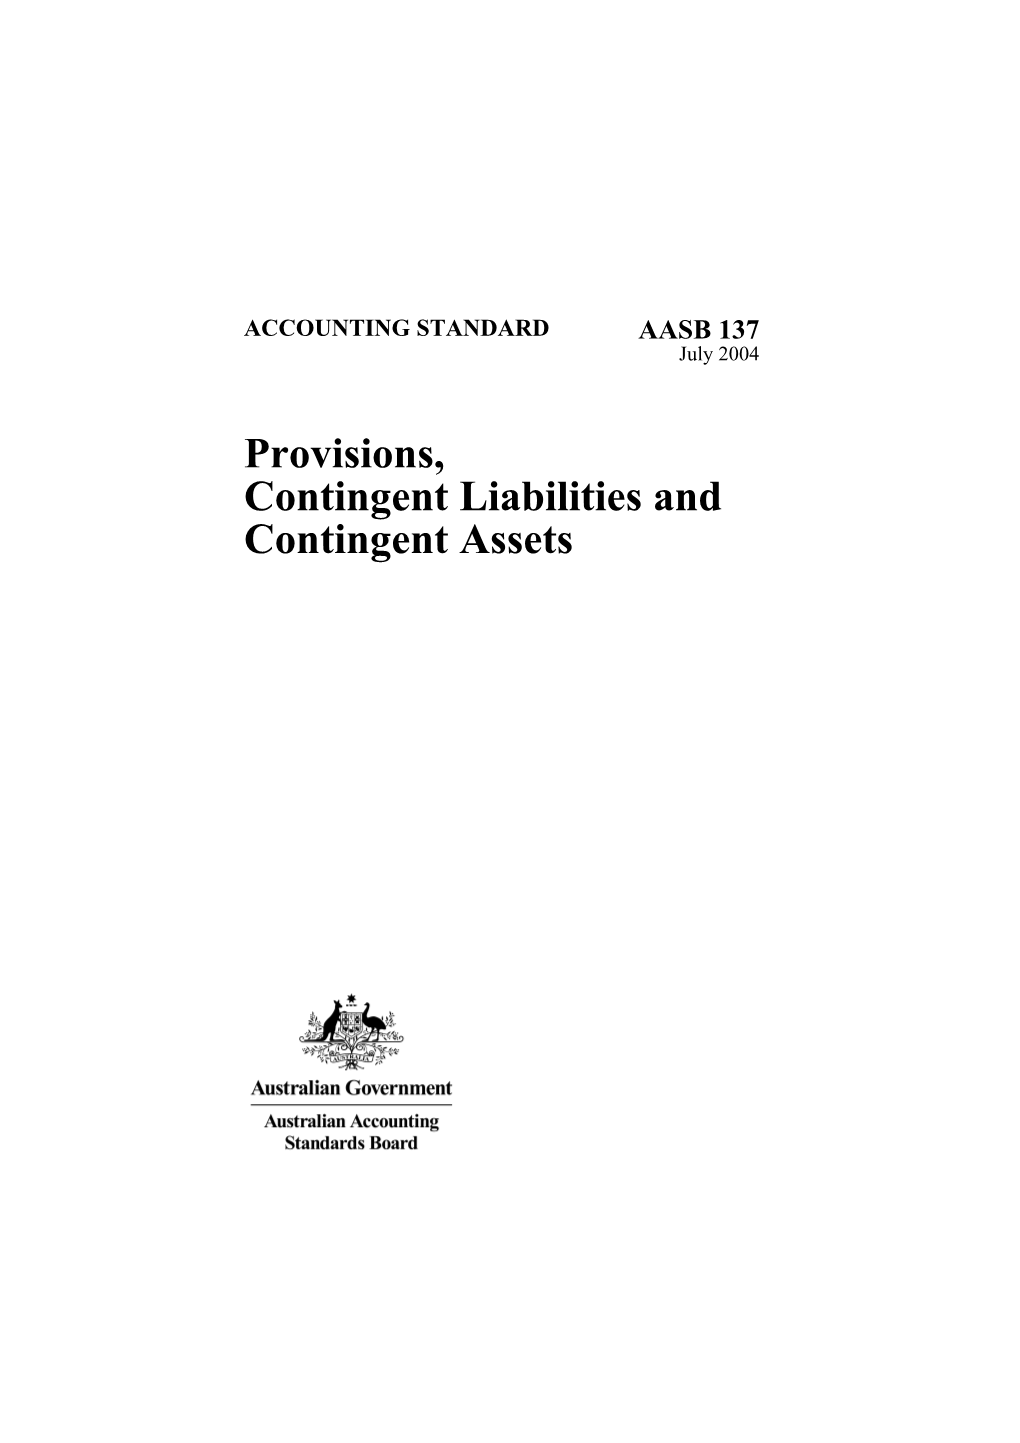 Provisions, Contingentliabilities and Contingent Assets